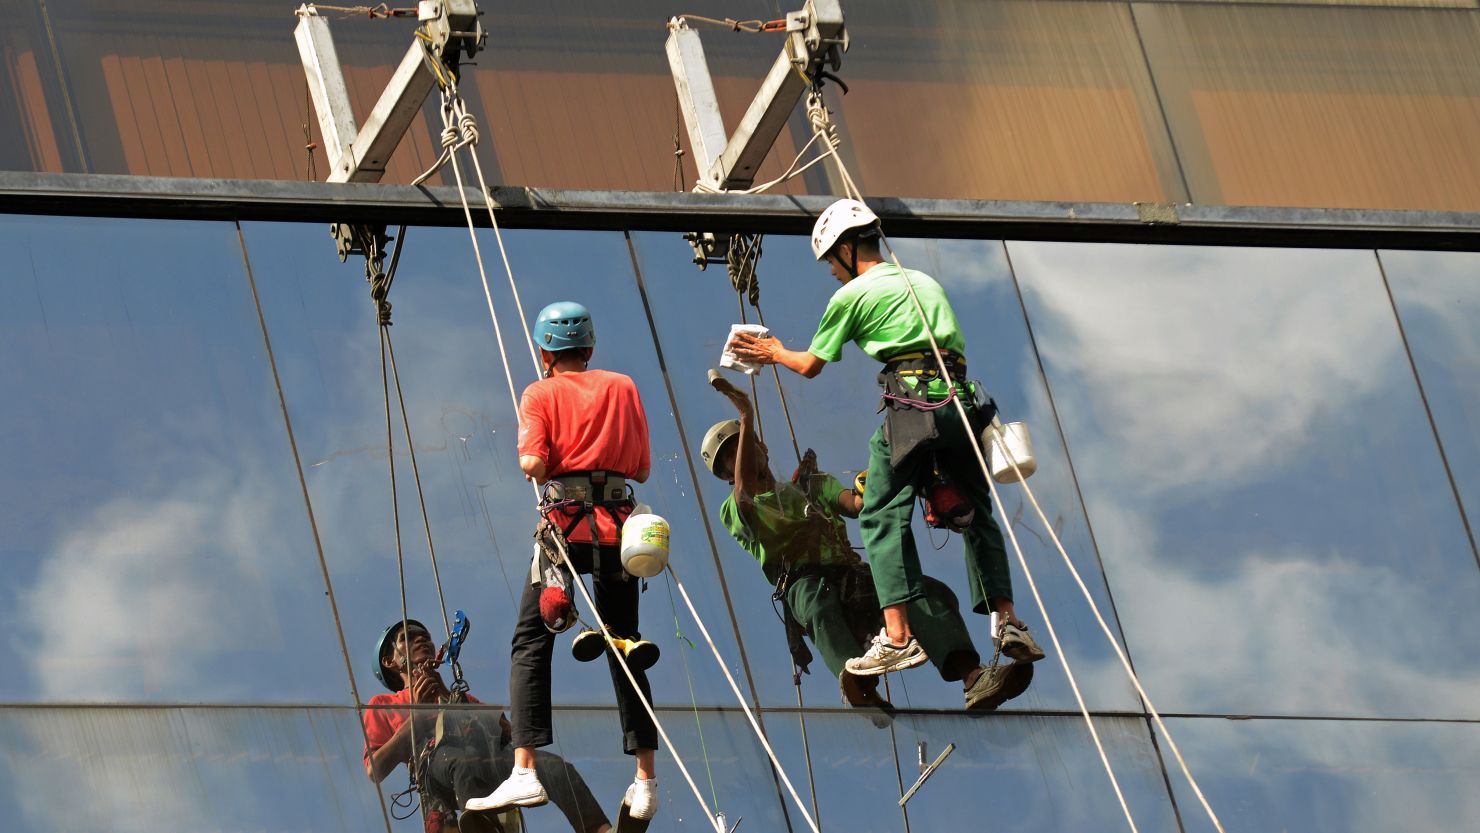 Workers clean windows of a building in Manila on November 28, 2012.